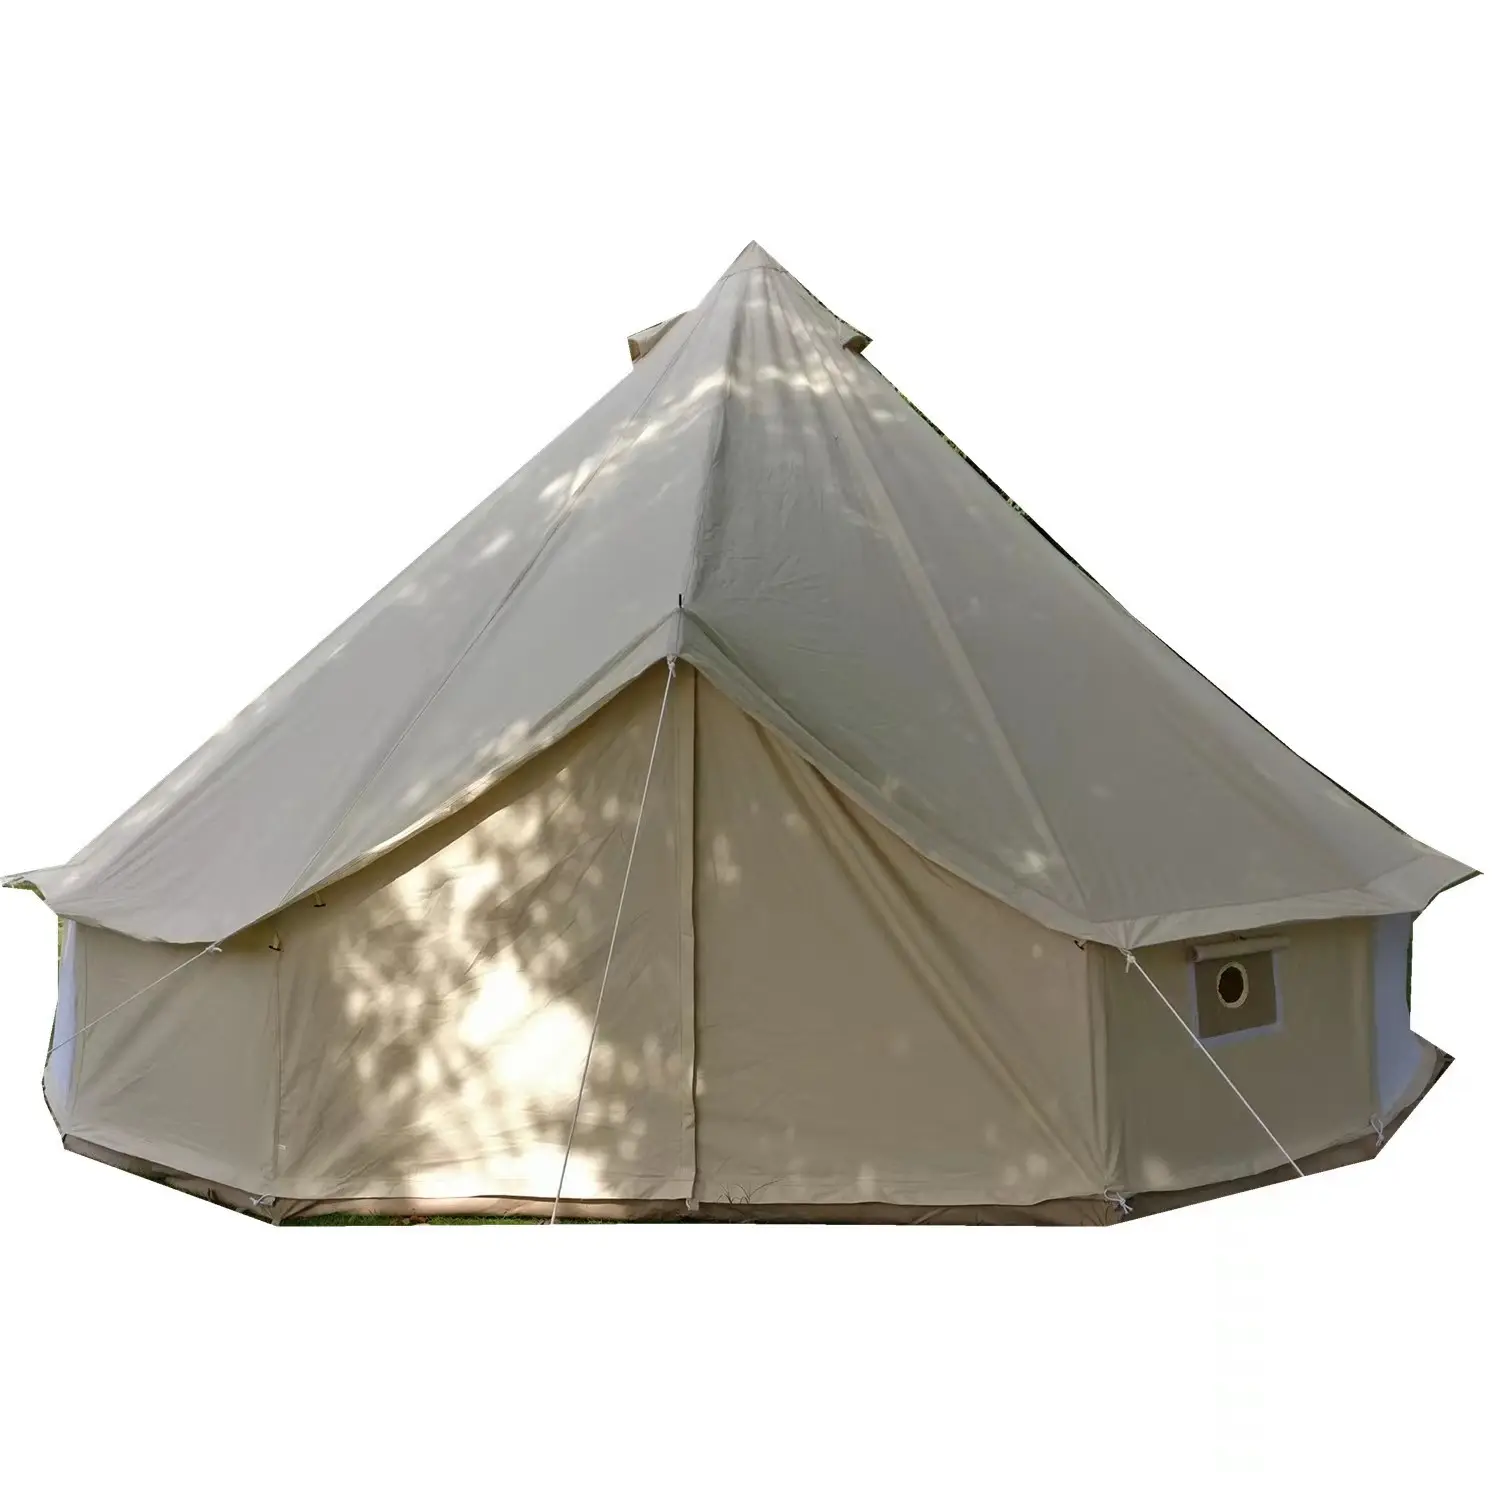 Oxford Tipi Desert Teepee Pyramid Yurt Bell Tent Sale for relax